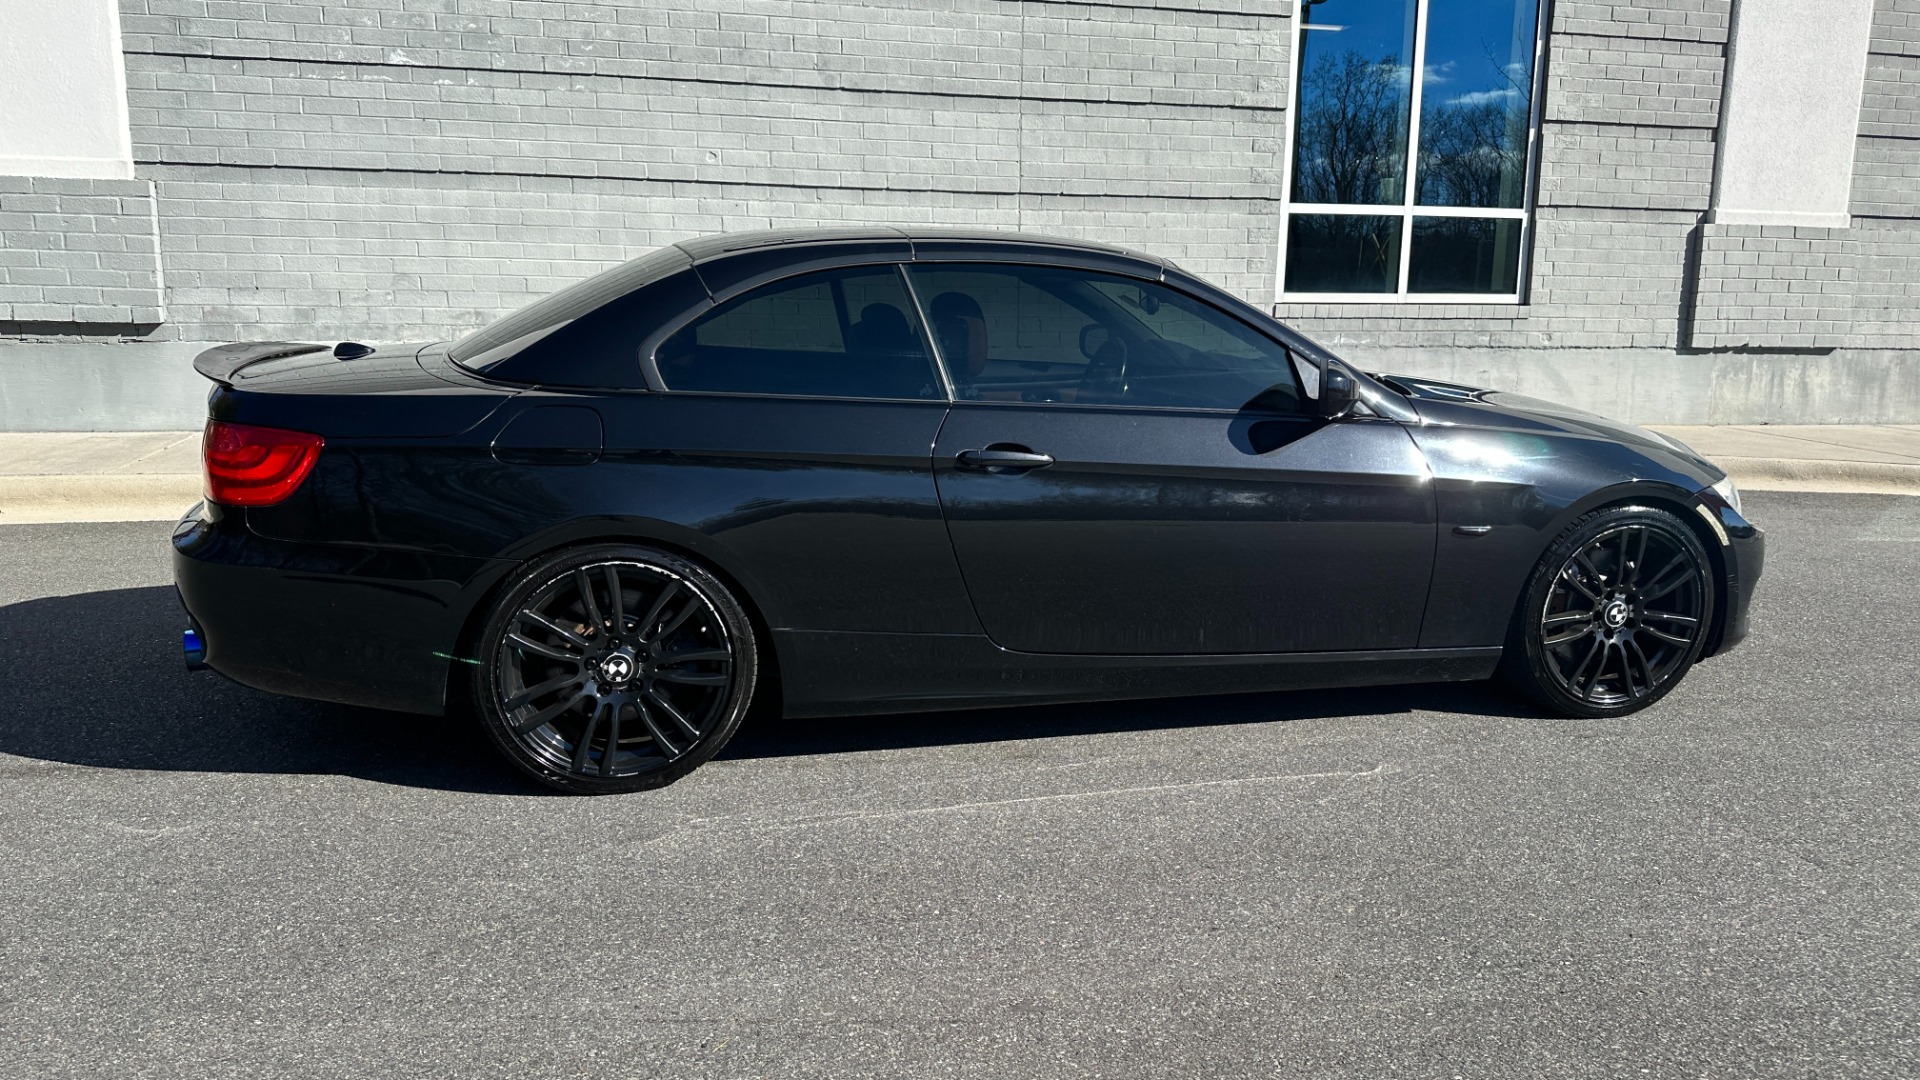 Used 2011 BMW 3 Series 335i / TURBO / HARD TOP CONVERTIBLE / LEATHER / BLACKOUT for sale $10,995 at Formula Imports in Charlotte NC 28227 3